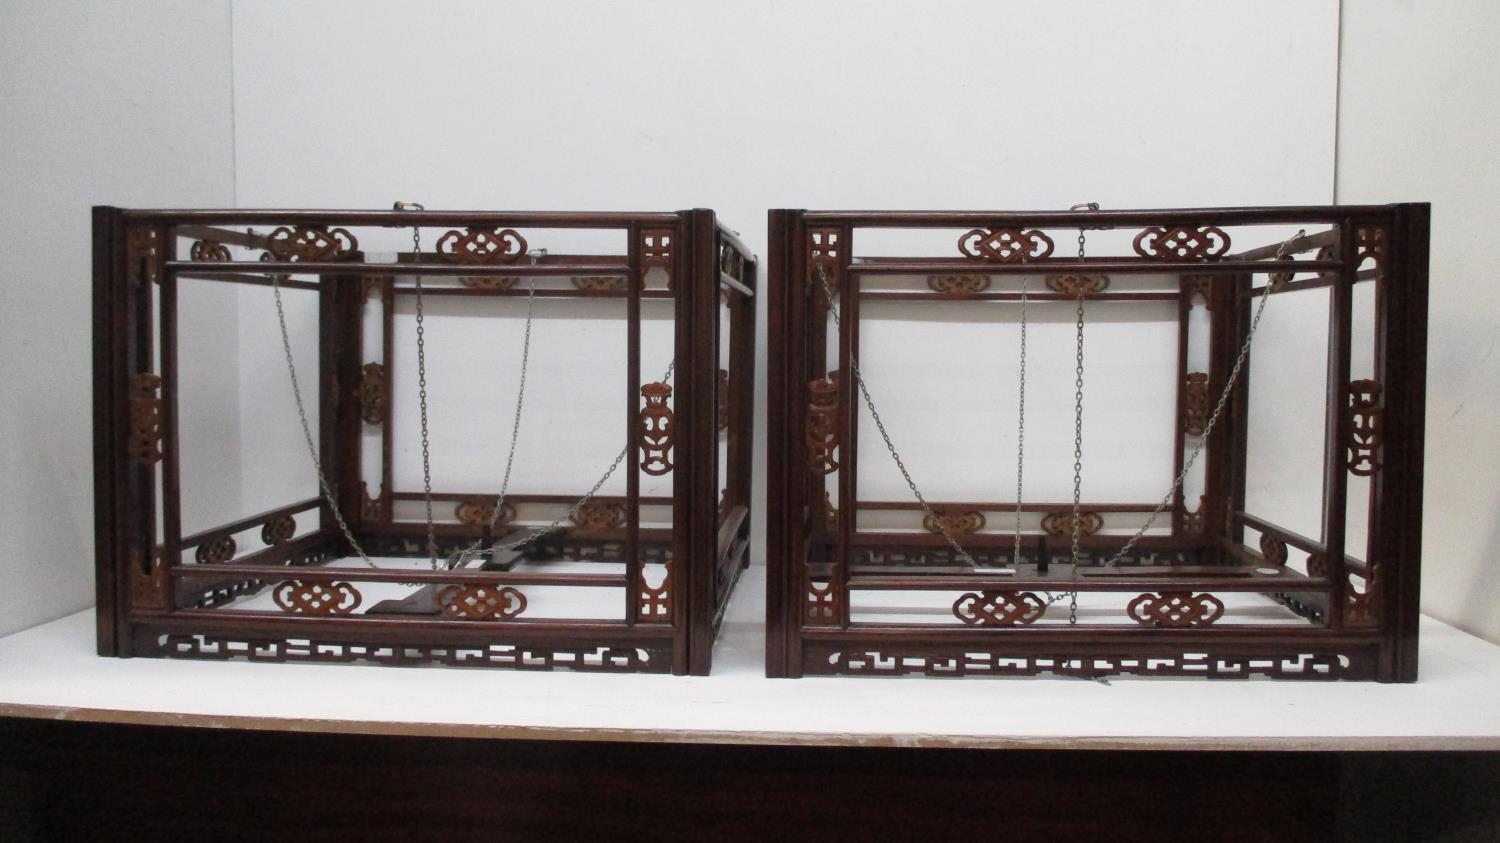 A pair of 19th century Chinese tielimu and boxwood hanging lanterns, carved and fretworked with